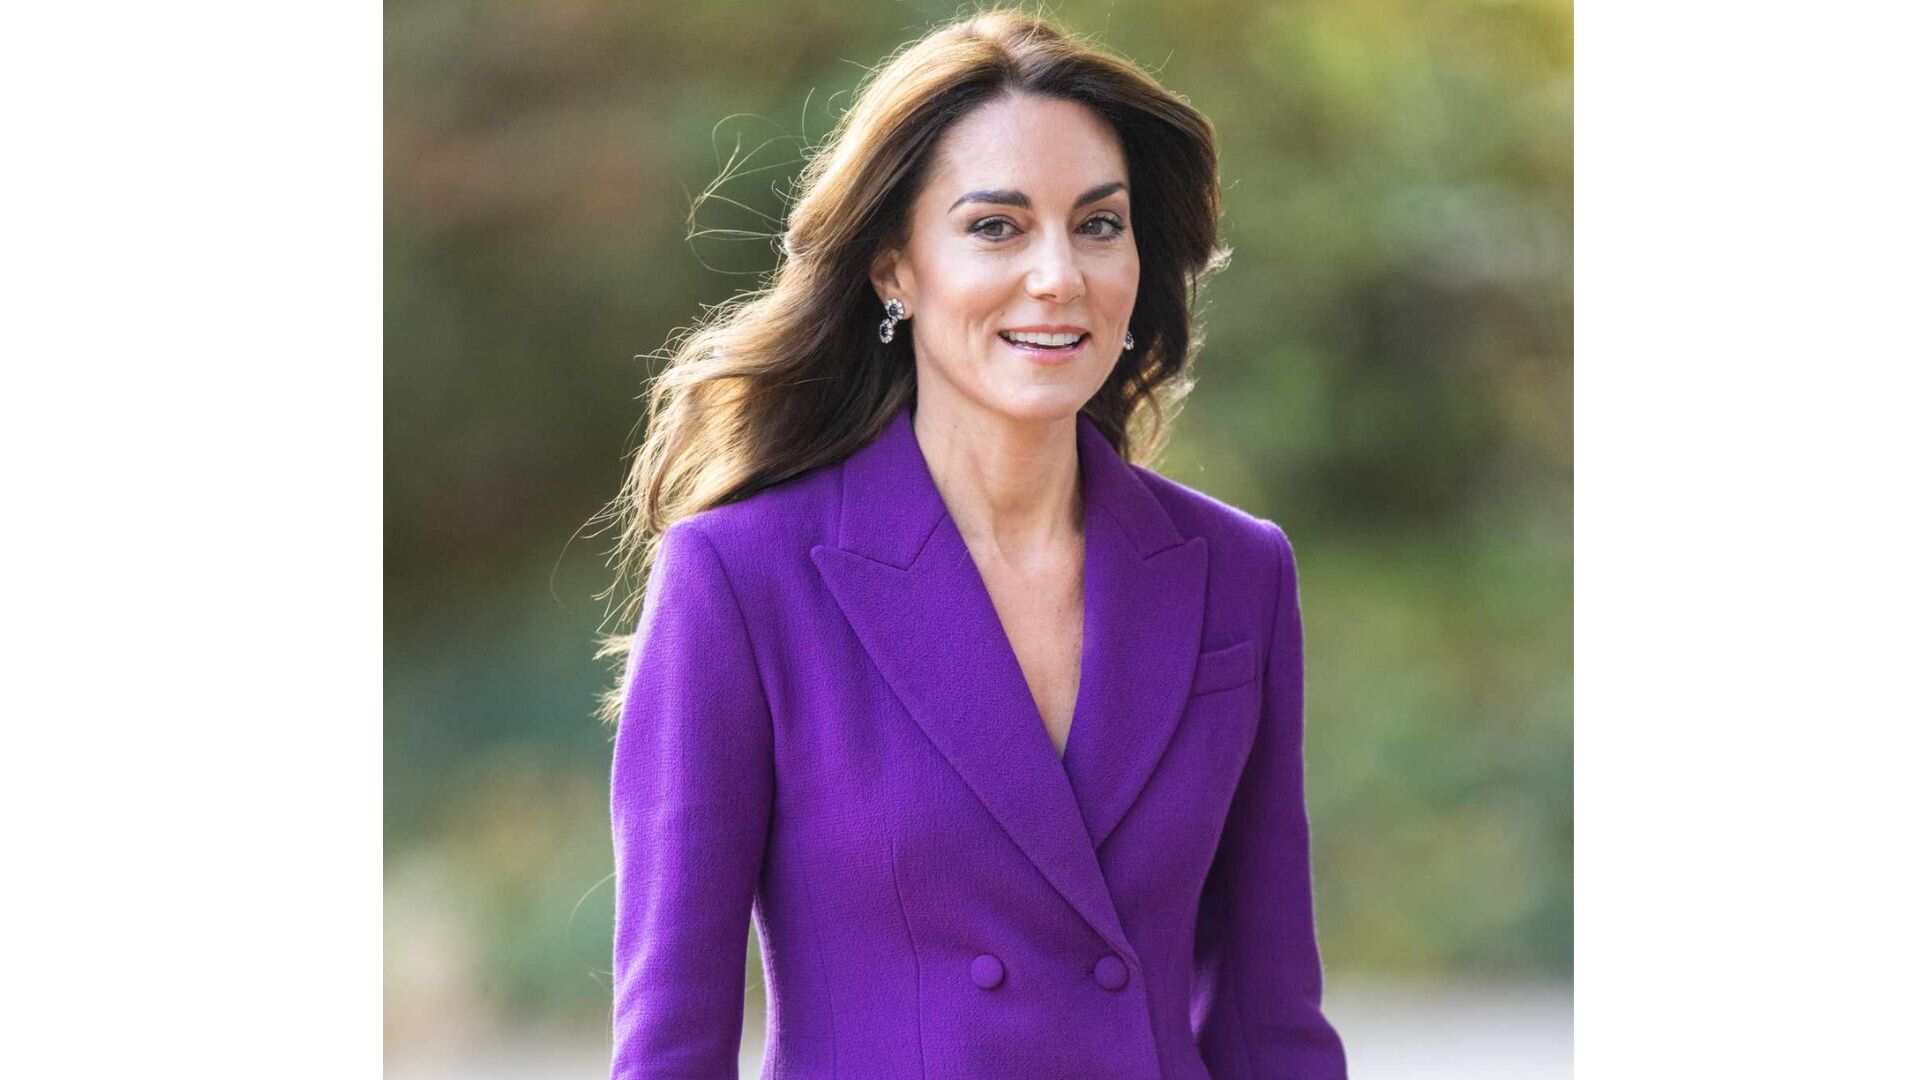 Kate Middleton’s Discreet Trip To US For Her Cancer Treatment